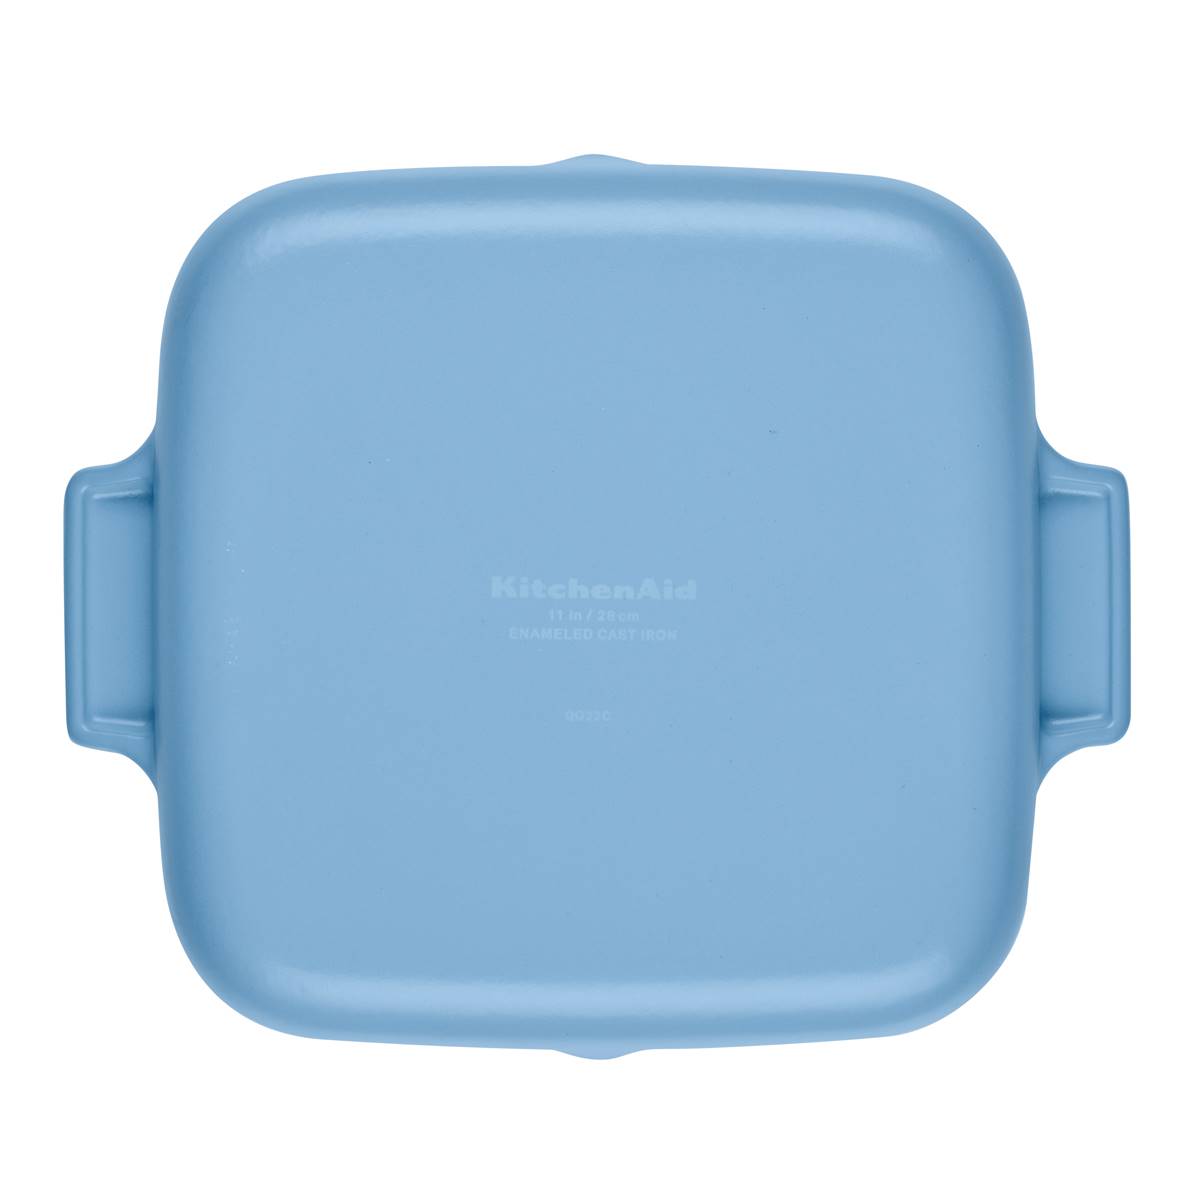 KitchenAid(R) 11in. Enameled Cast Iron Square Grill Pan - Blue